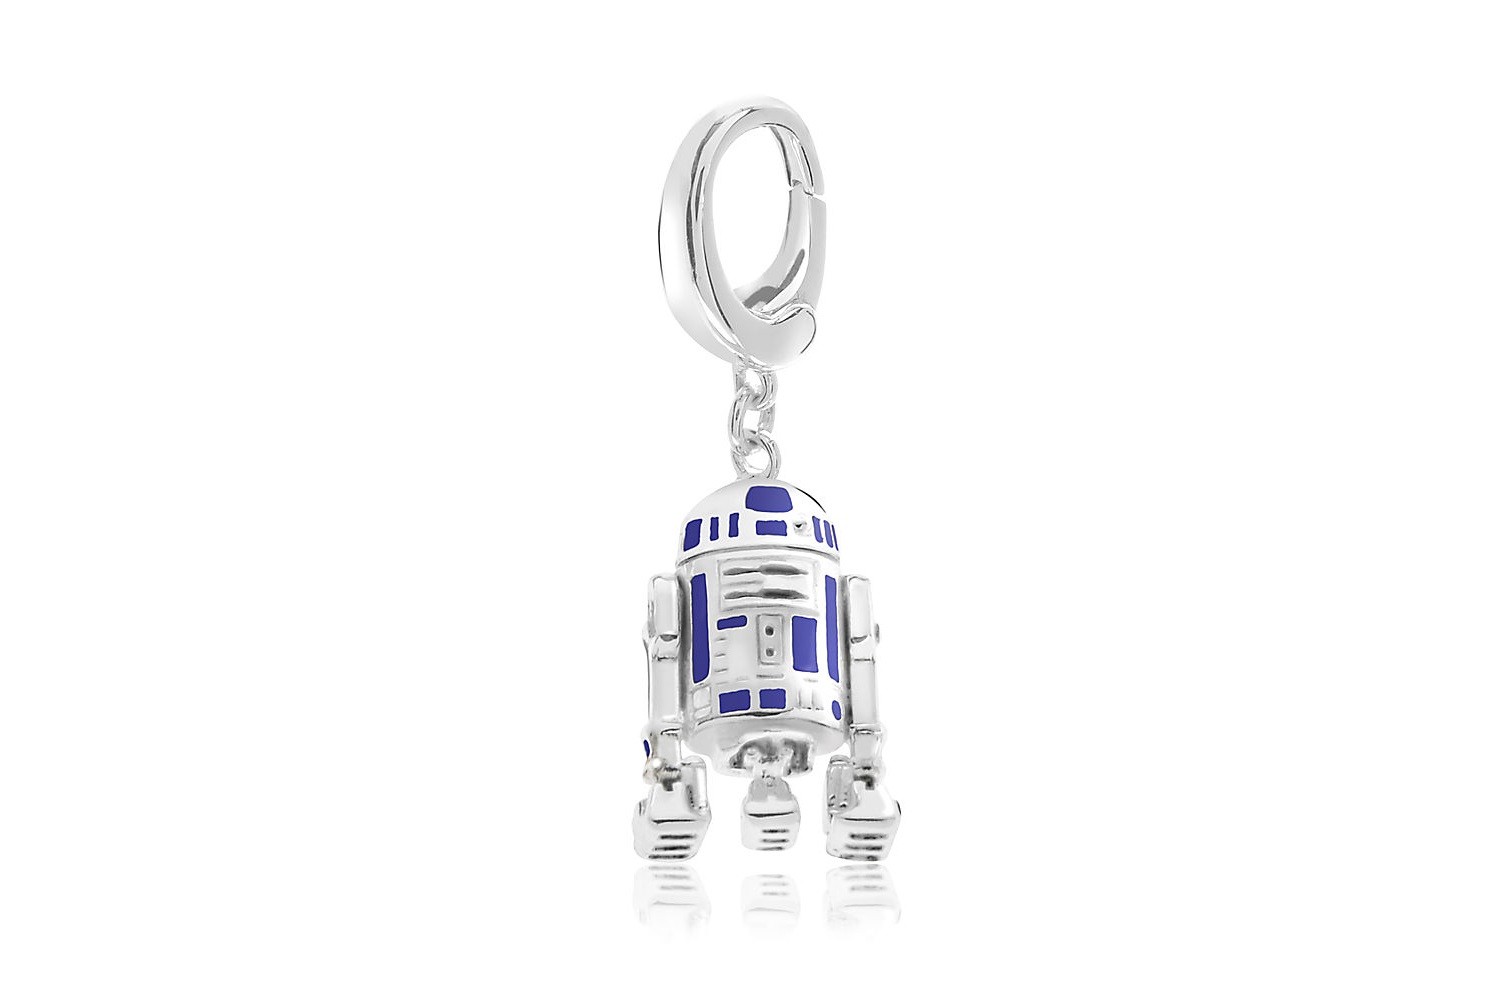 Sterling Silver R2-D2 charm (Disney Designer Jewelry Collection) available from the Disney Store